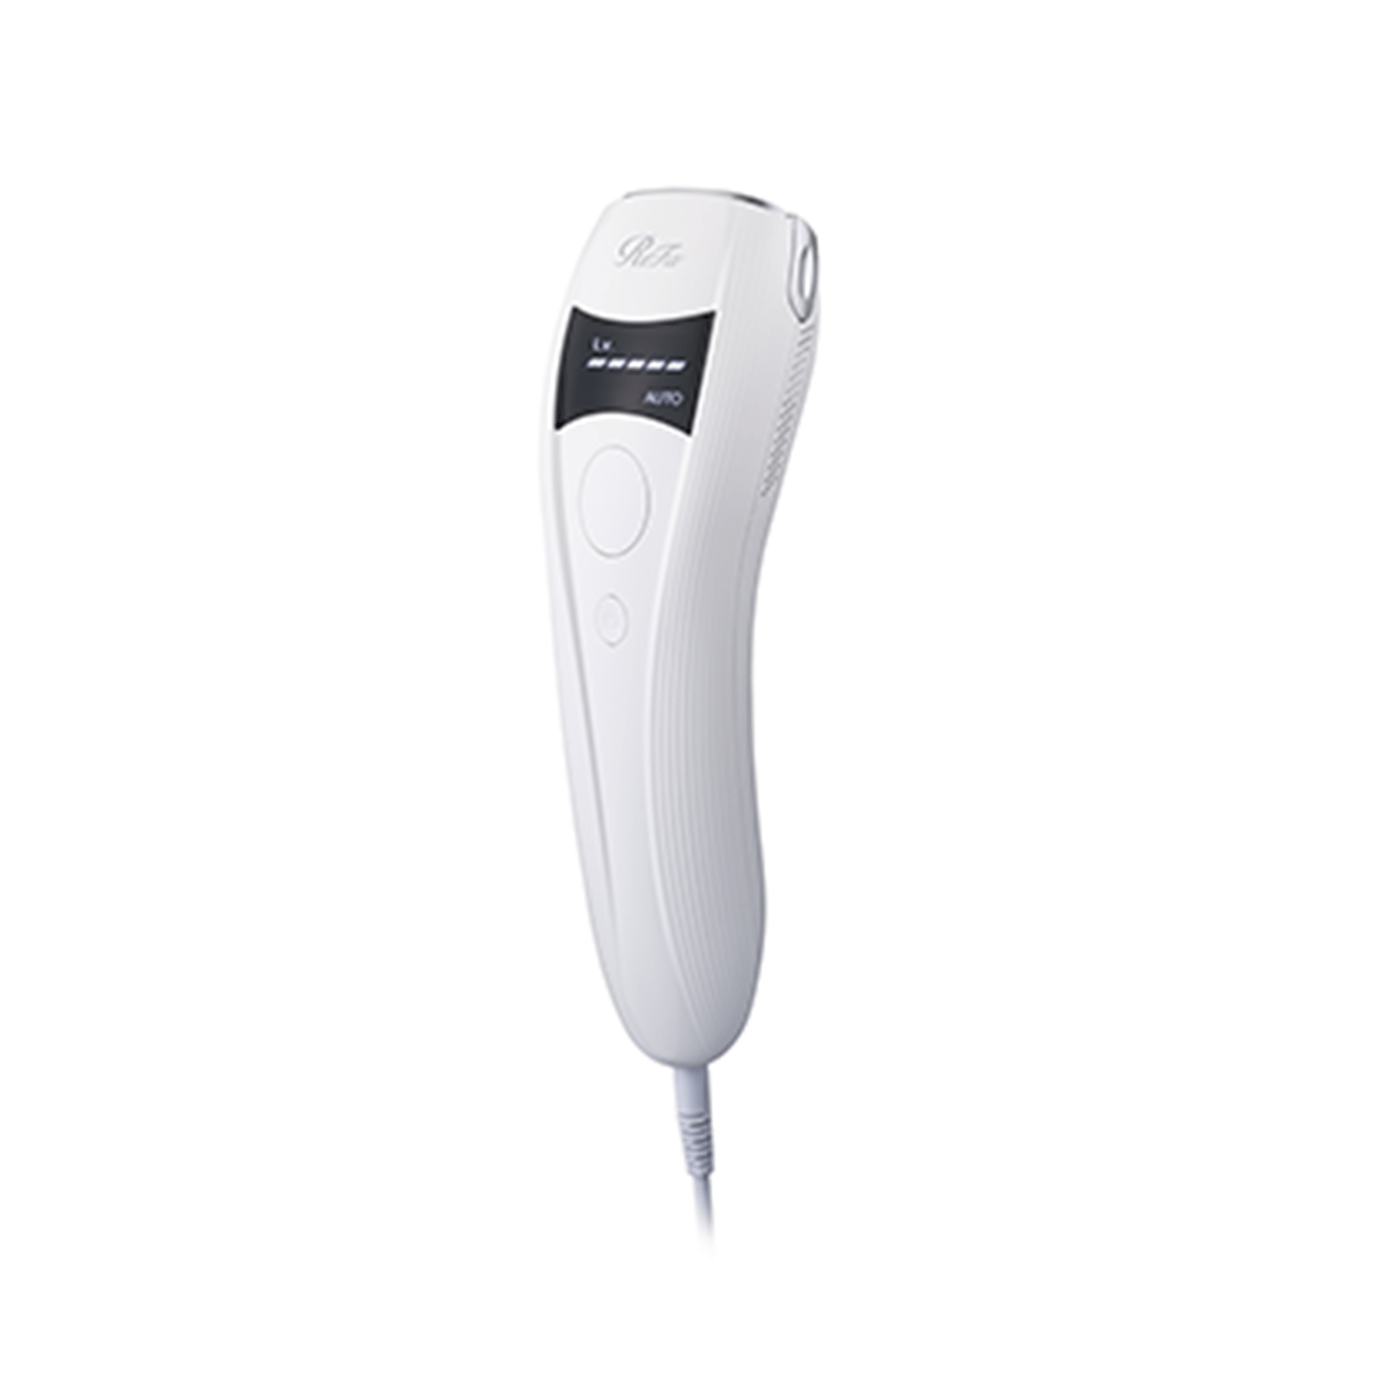 ReFa BEAUTECH EPI, an IPL beauty device with a simple design that makes it very easy to use. Launch date: Friday, April 8, 2022!